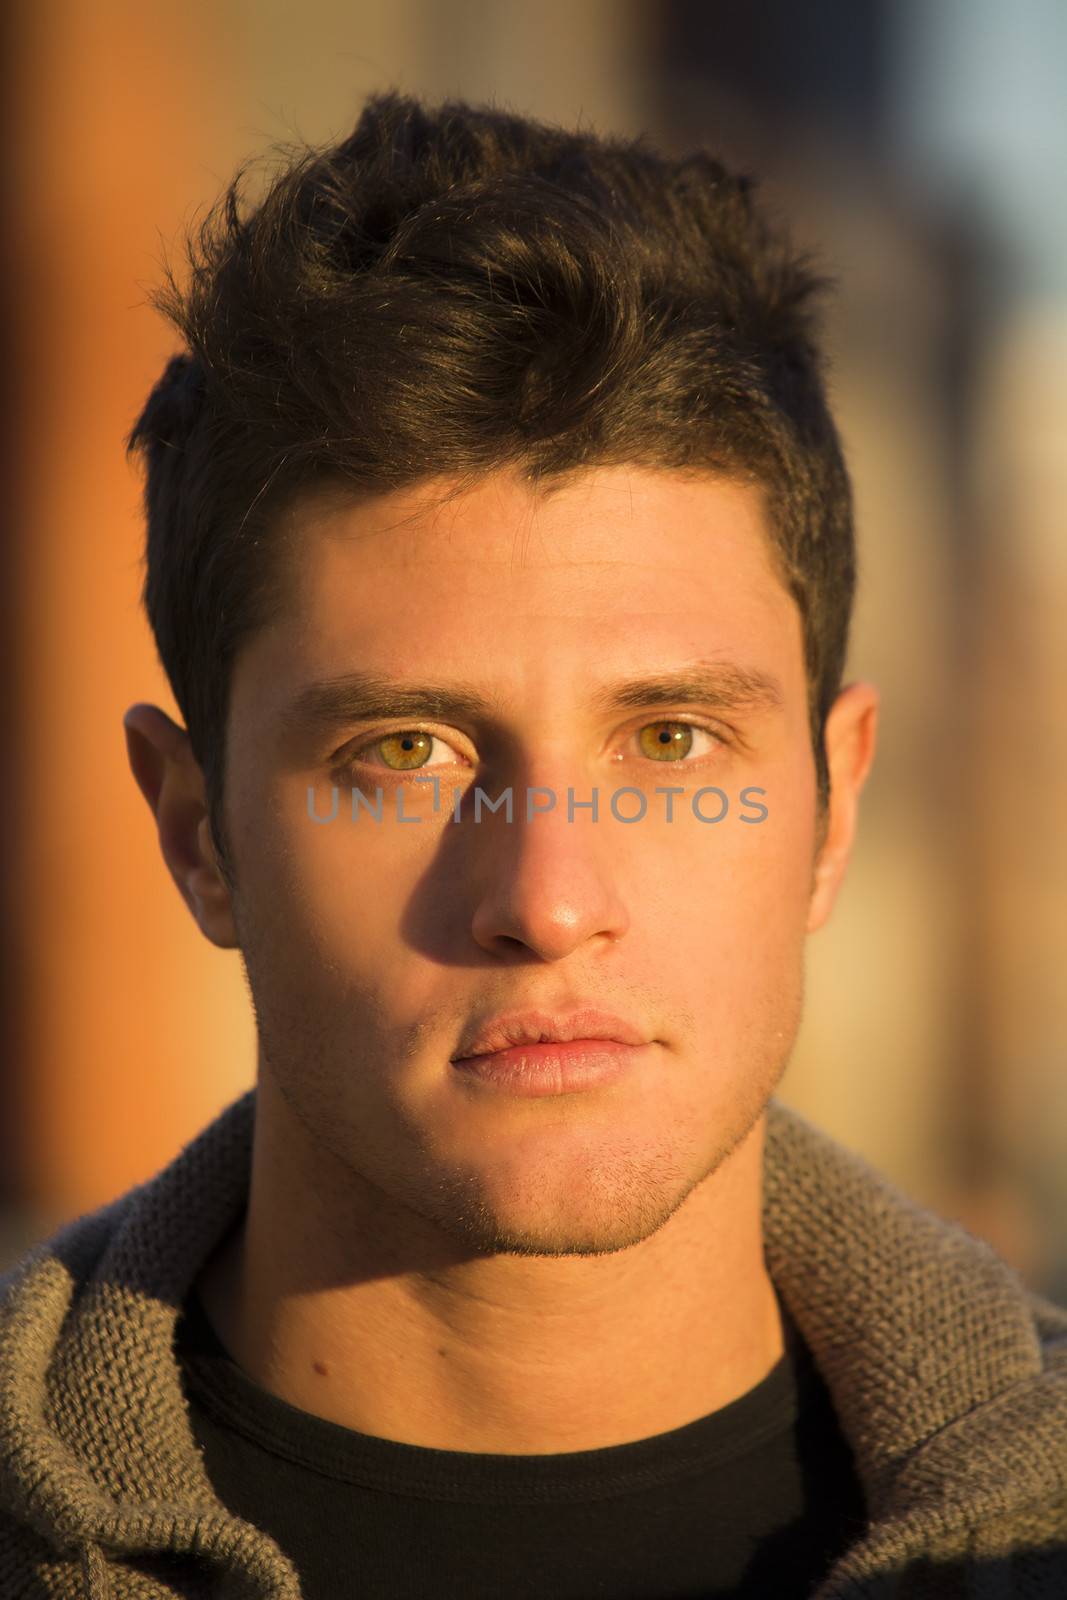 Headshot of handsome young man, lit by sunset light